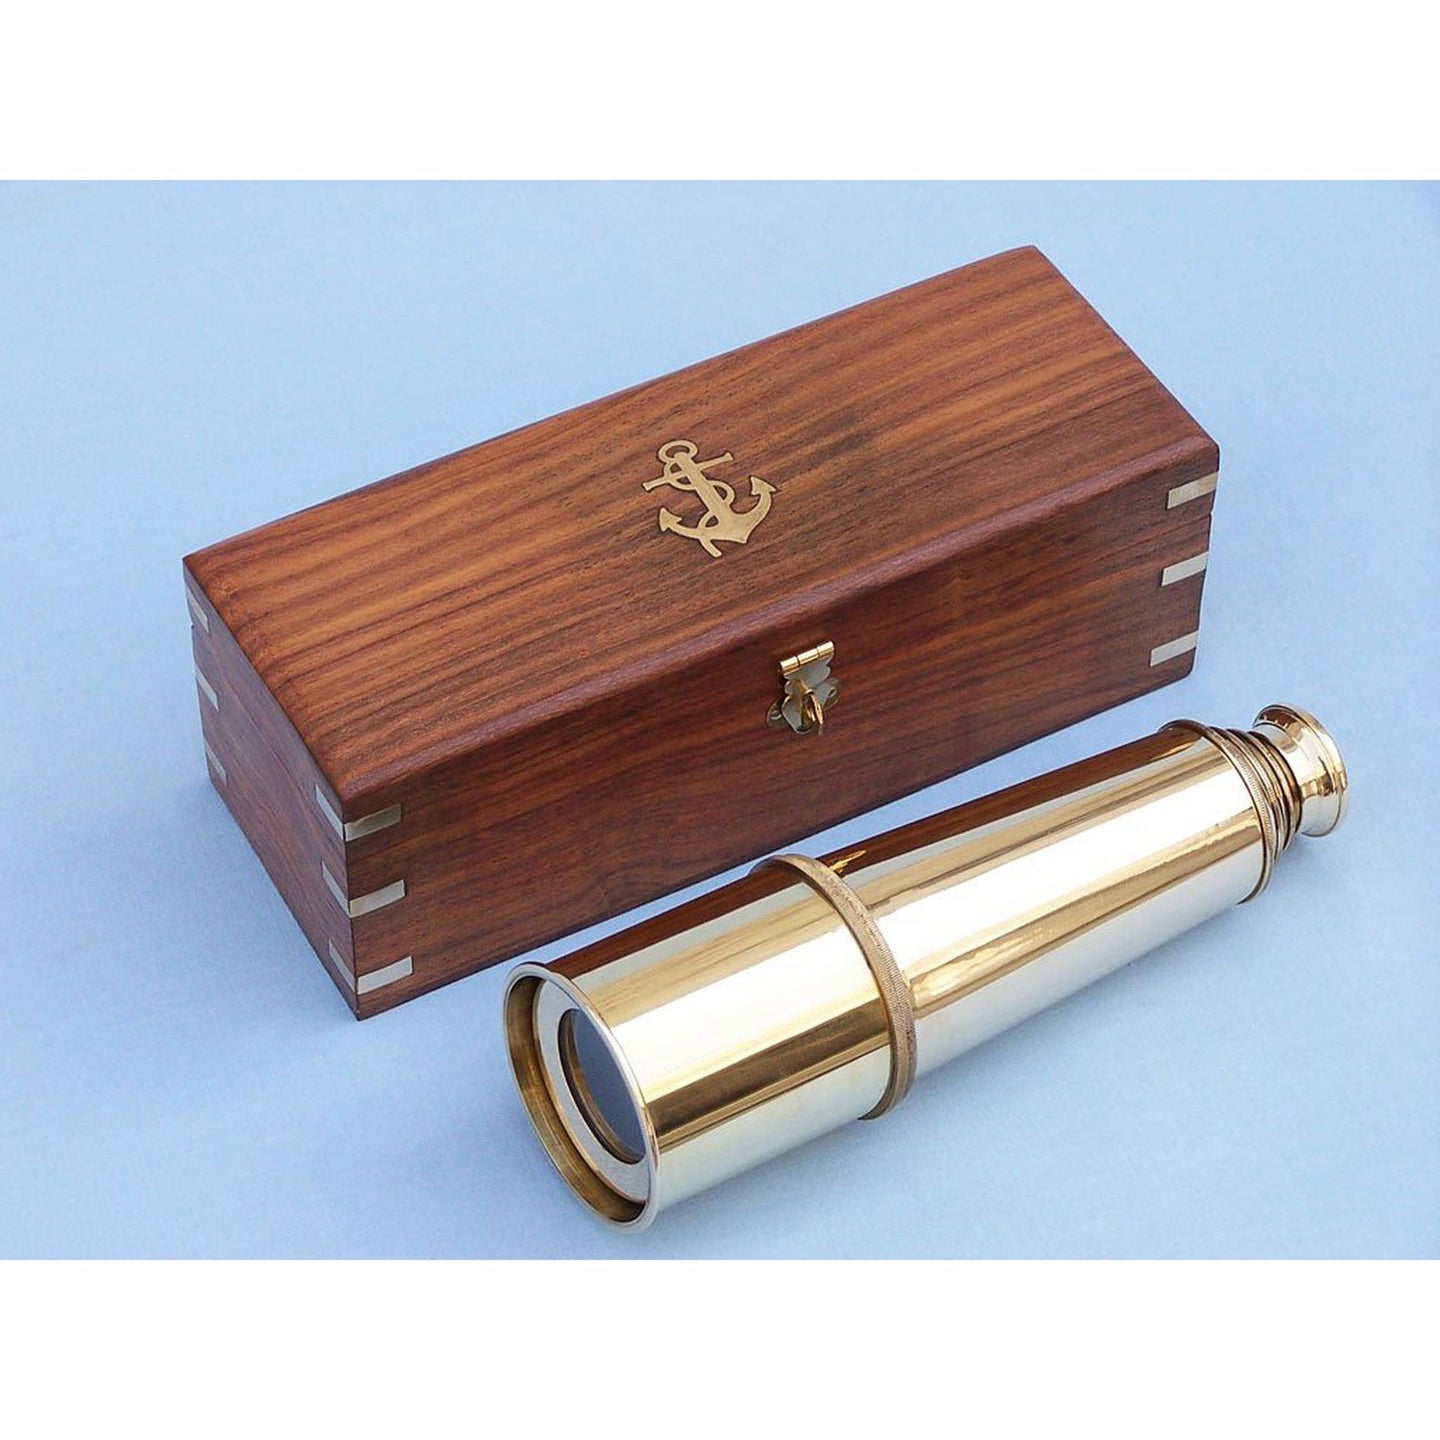 Handcrafted Model Ships Deluxe Class Solid Brass Admiral's Spyglass Telescope 27 FT-0215